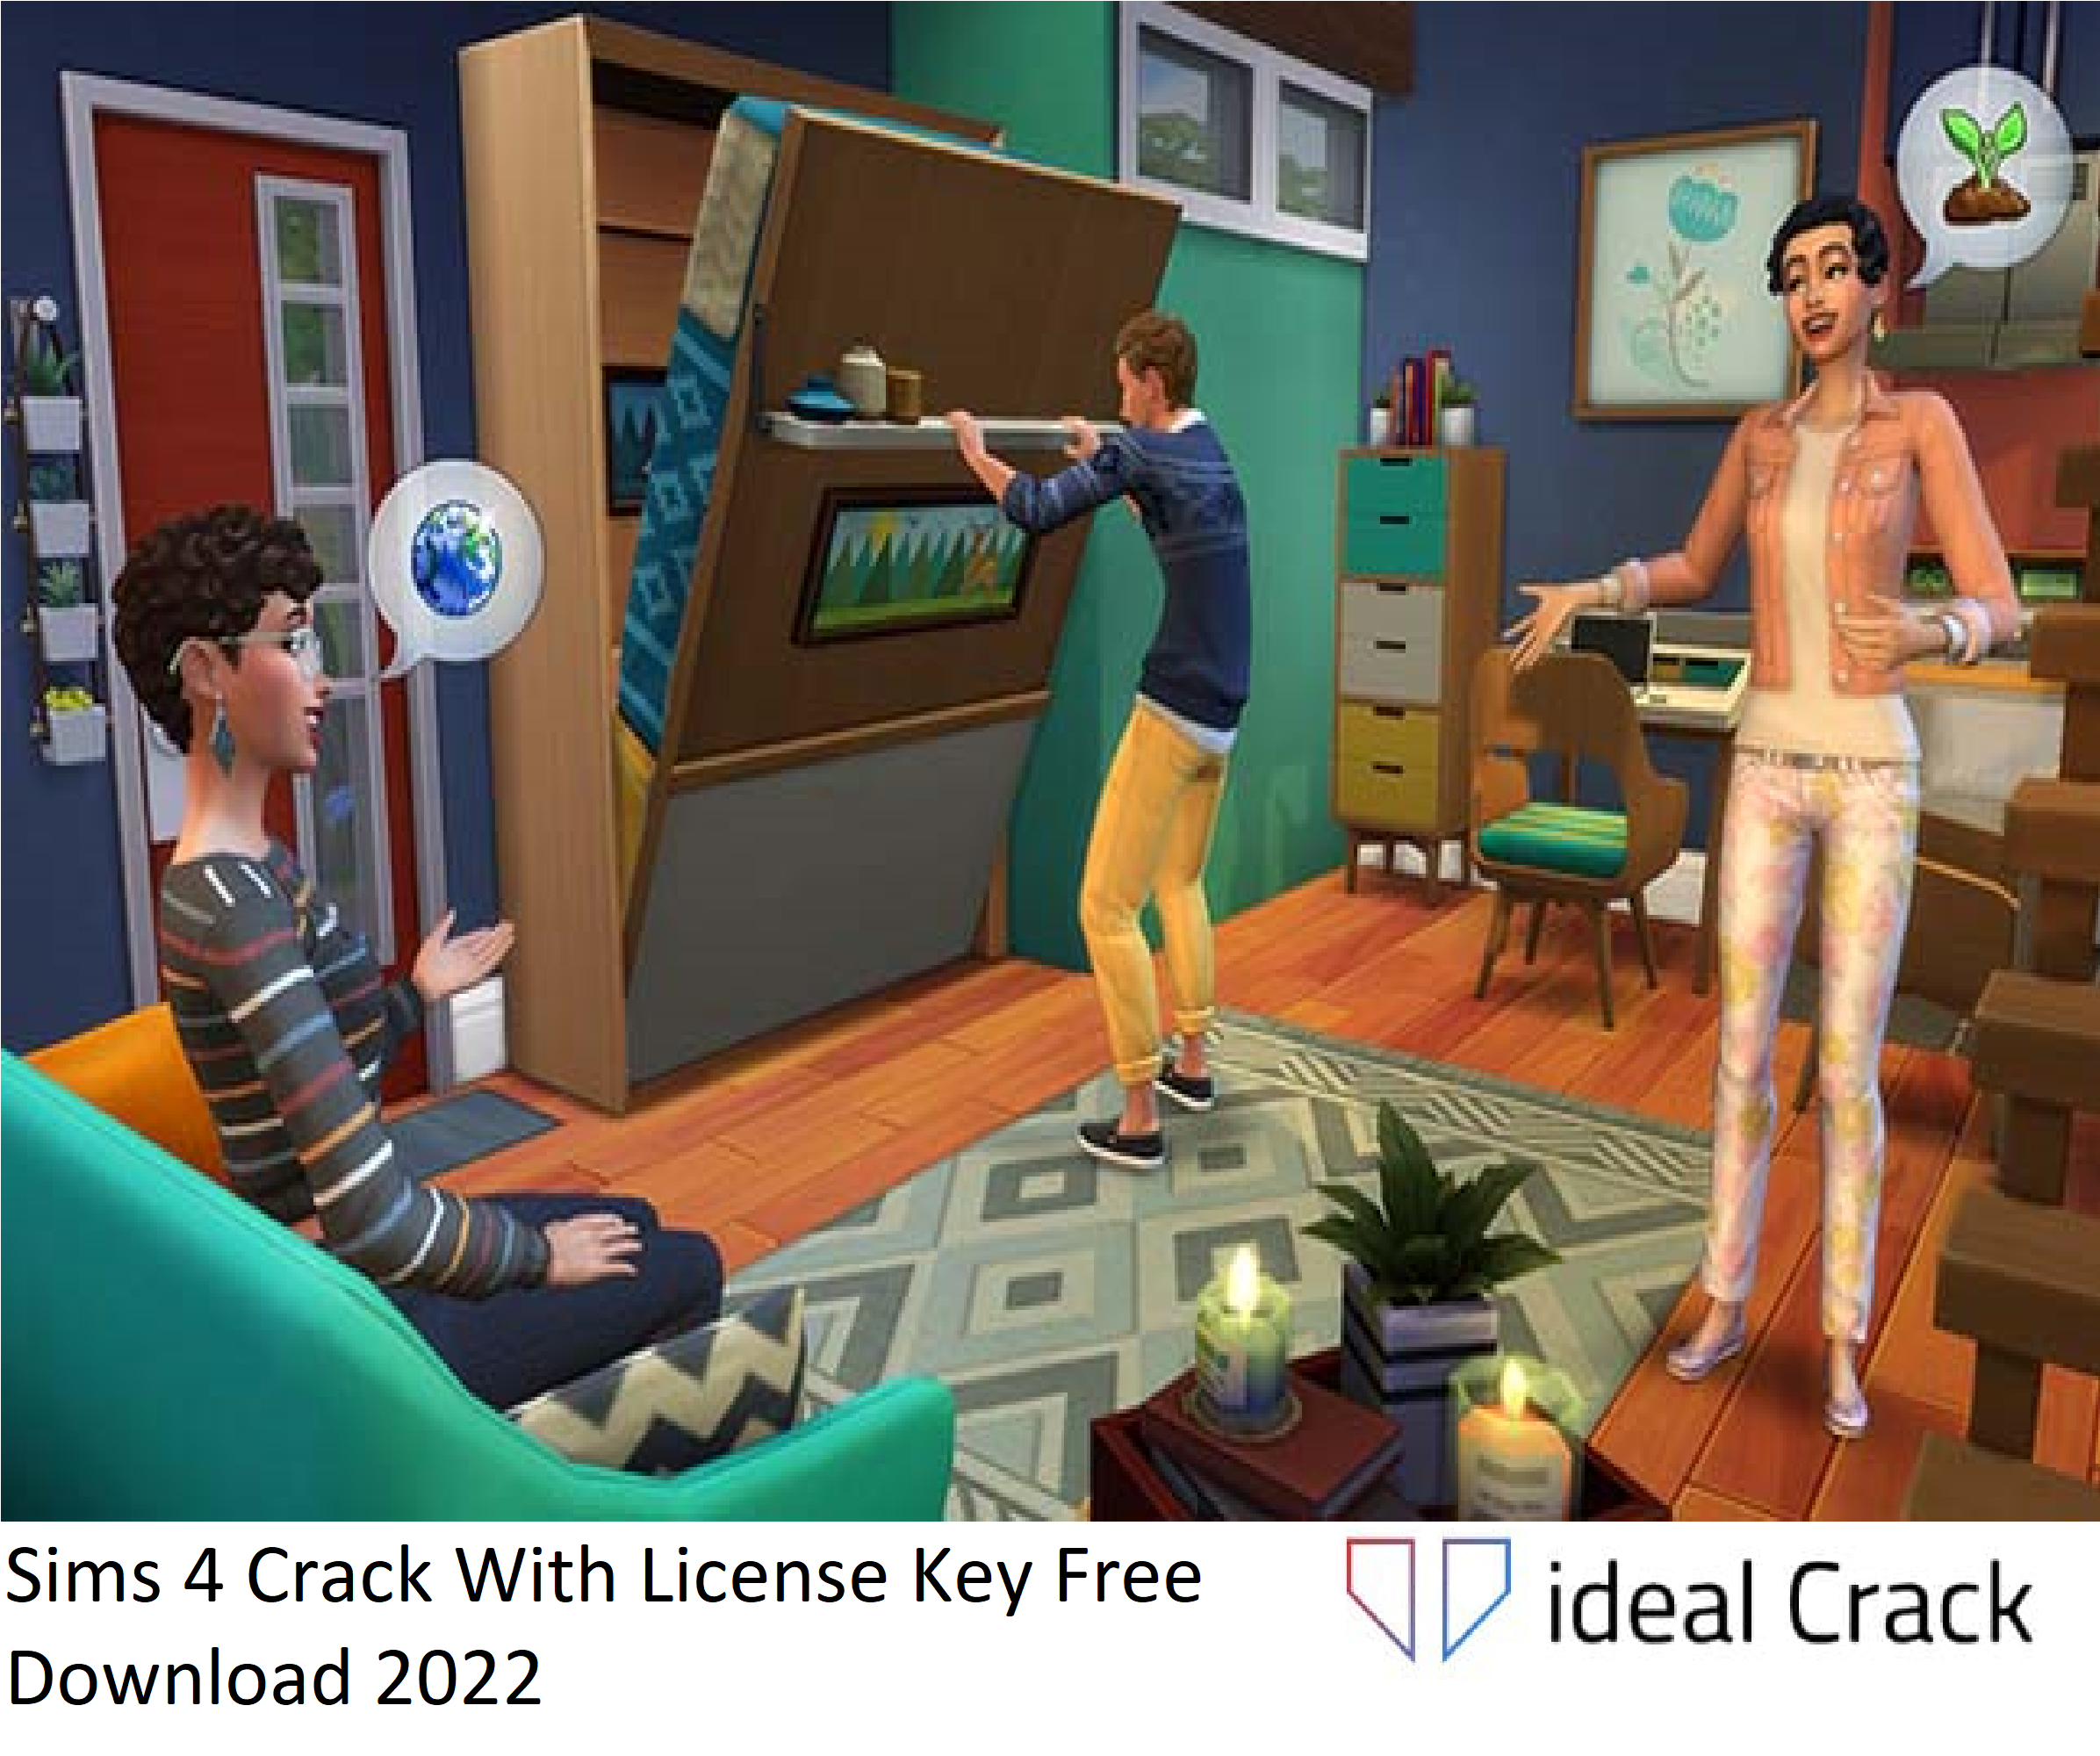 Sims 4 Crack With License Key Free Download 2022